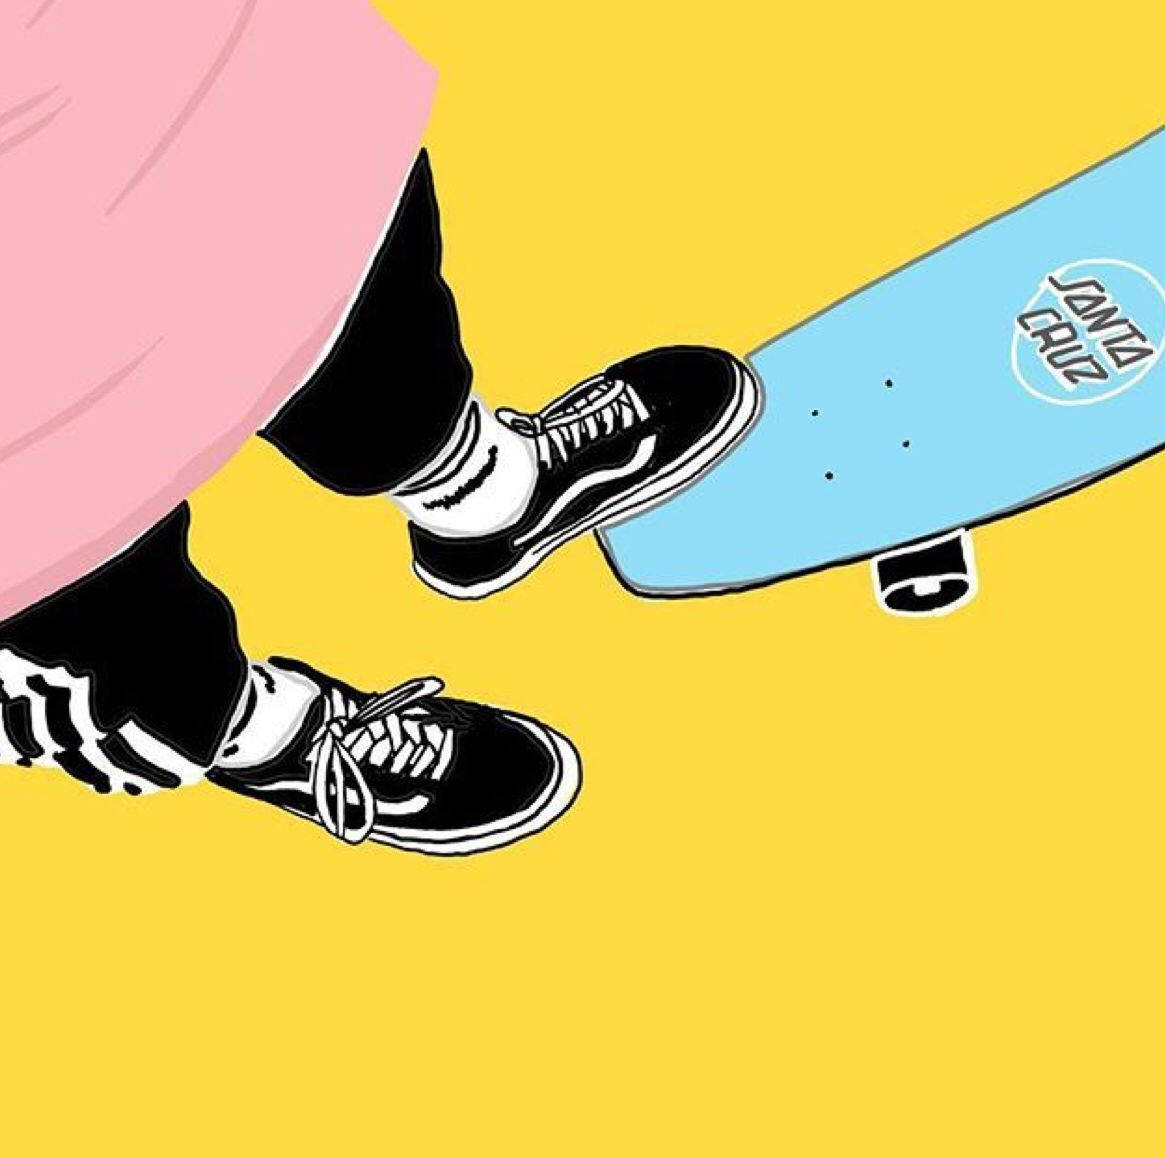 Aesthetic Skateboard Pictures Wallpapers